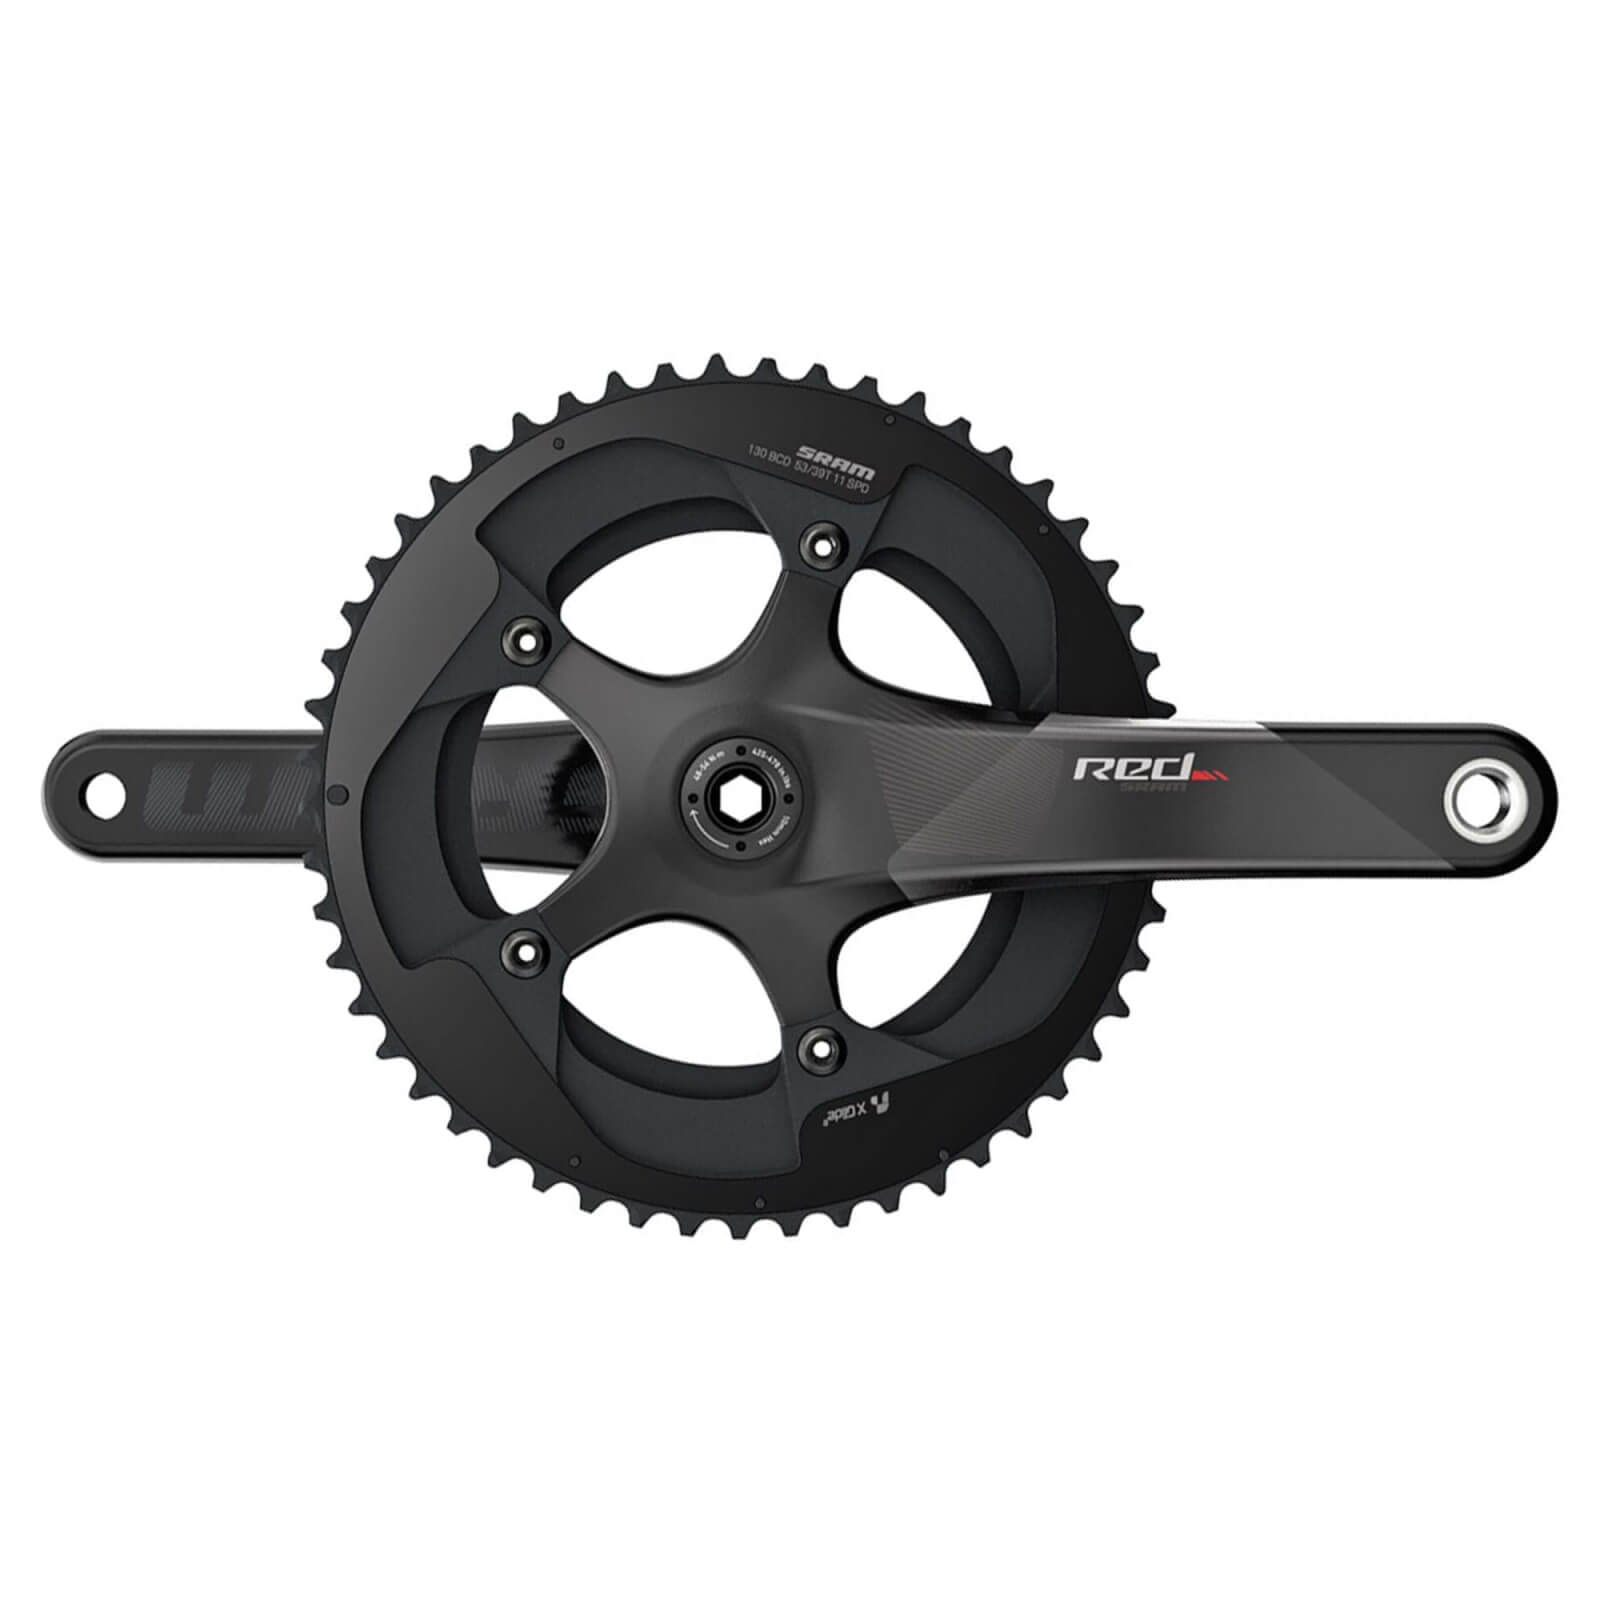 SRAM Red 11 Speed BB30 Chainset - 53-39T x 172.5mm